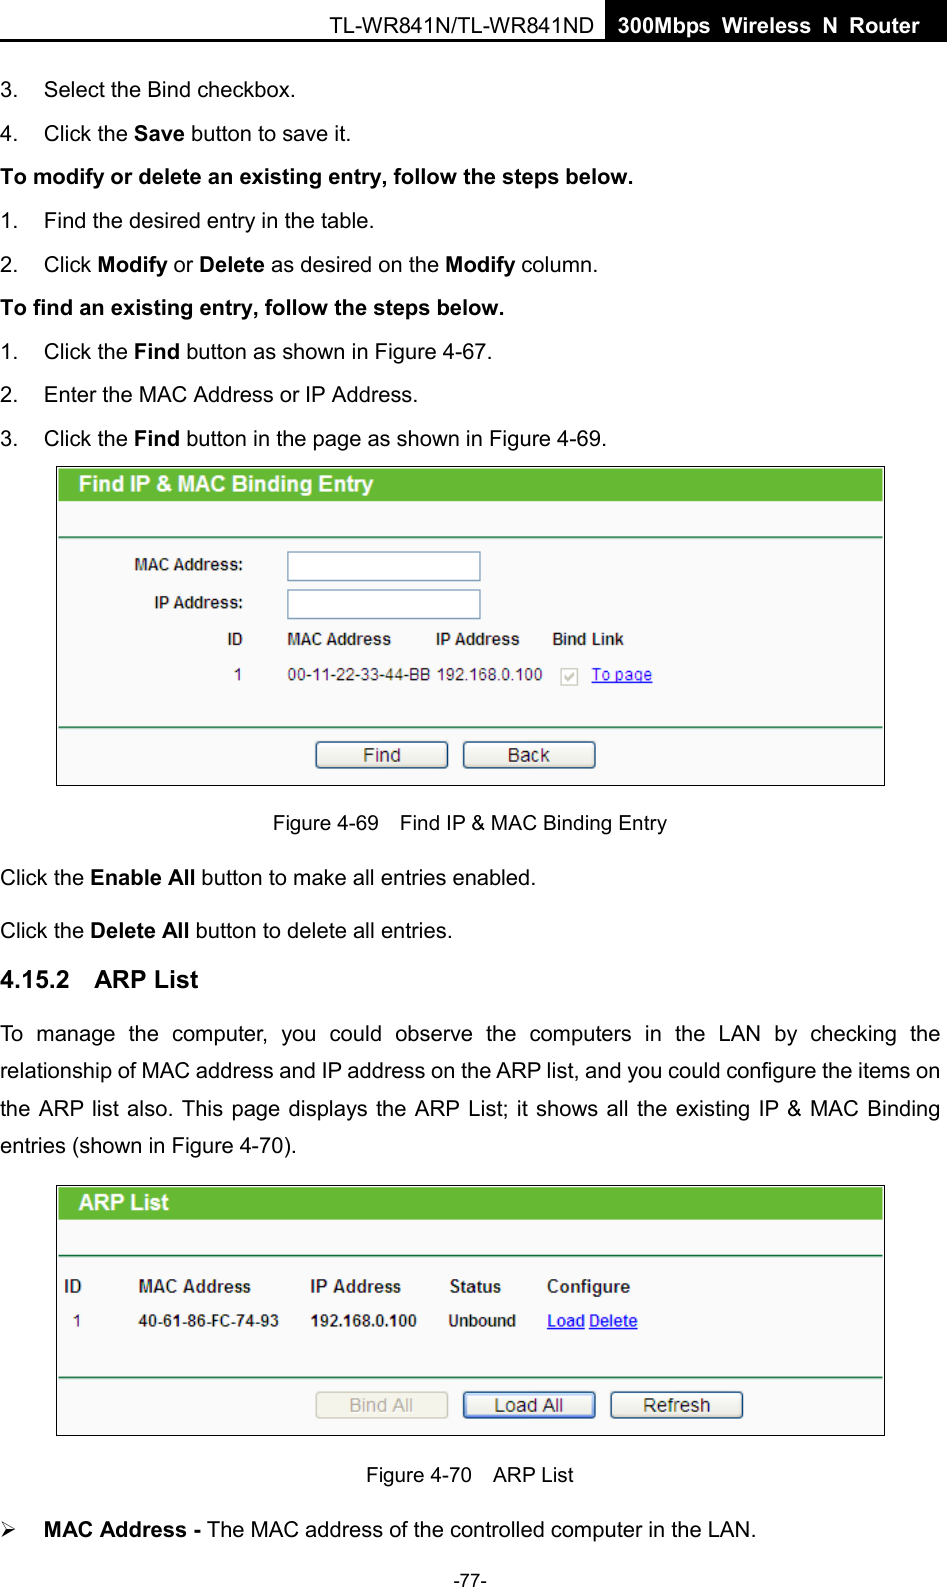  TL-WR841N/TL-WR841ND  300Mbps Wireless N Router    3. Select the Bind checkbox.   4. Click the Save button to save it. To modify or delete an existing entry, follow the steps below. 1. Find the desired entry in the table.   2. Click Modify or Delete as desired on the Modify column.   To find an existing entry, follow the steps below. 1. Click the Find button as shown in Figure 4-67. 2. Enter the MAC Address or IP Address. 3. Click the Find button in the page as shown in Figure 4-69.  Figure 4-69  Find IP &amp; MAC Binding Entry Click the Enable All button to make all entries enabled. Click the Delete All button to delete all entries. 4.15.2 ARP List To manage the computer, you could observe the computers in the LAN by checking the relationship of MAC address and IP address on the ARP list, and you could configure the items on the ARP list also. This page displays the ARP List; it shows all the existing IP &amp; MAC Binding entries (shown in Figure 4-70).    Figure 4-70  ARP List  MAC Address - The MAC address of the controlled computer in the LAN.   -77- 